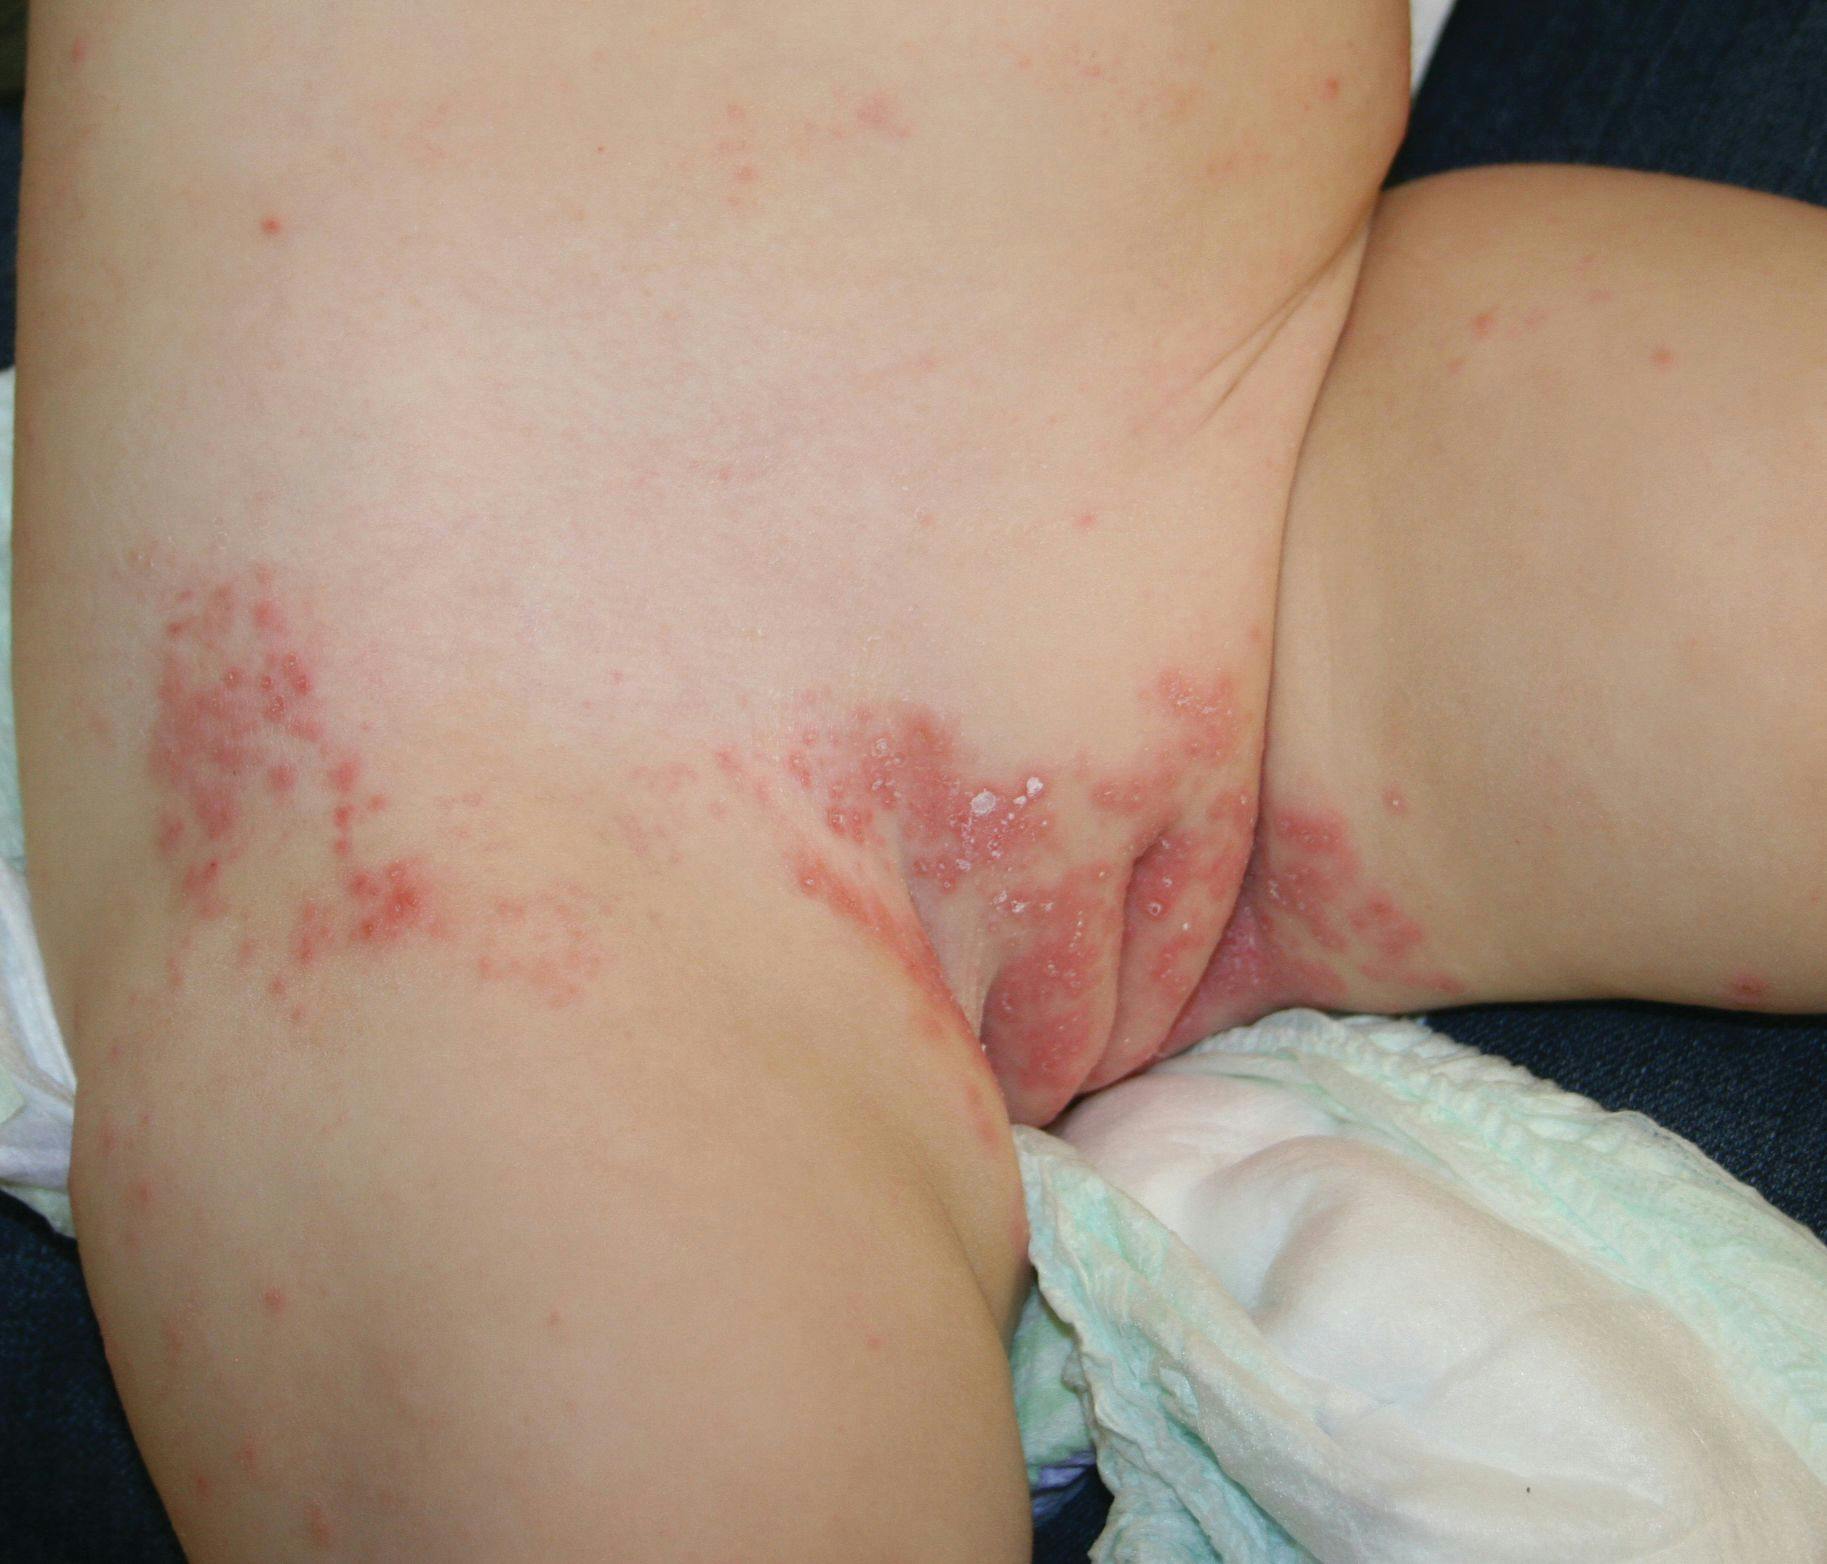 Infantile psoriasis (Image credit: Author provided)